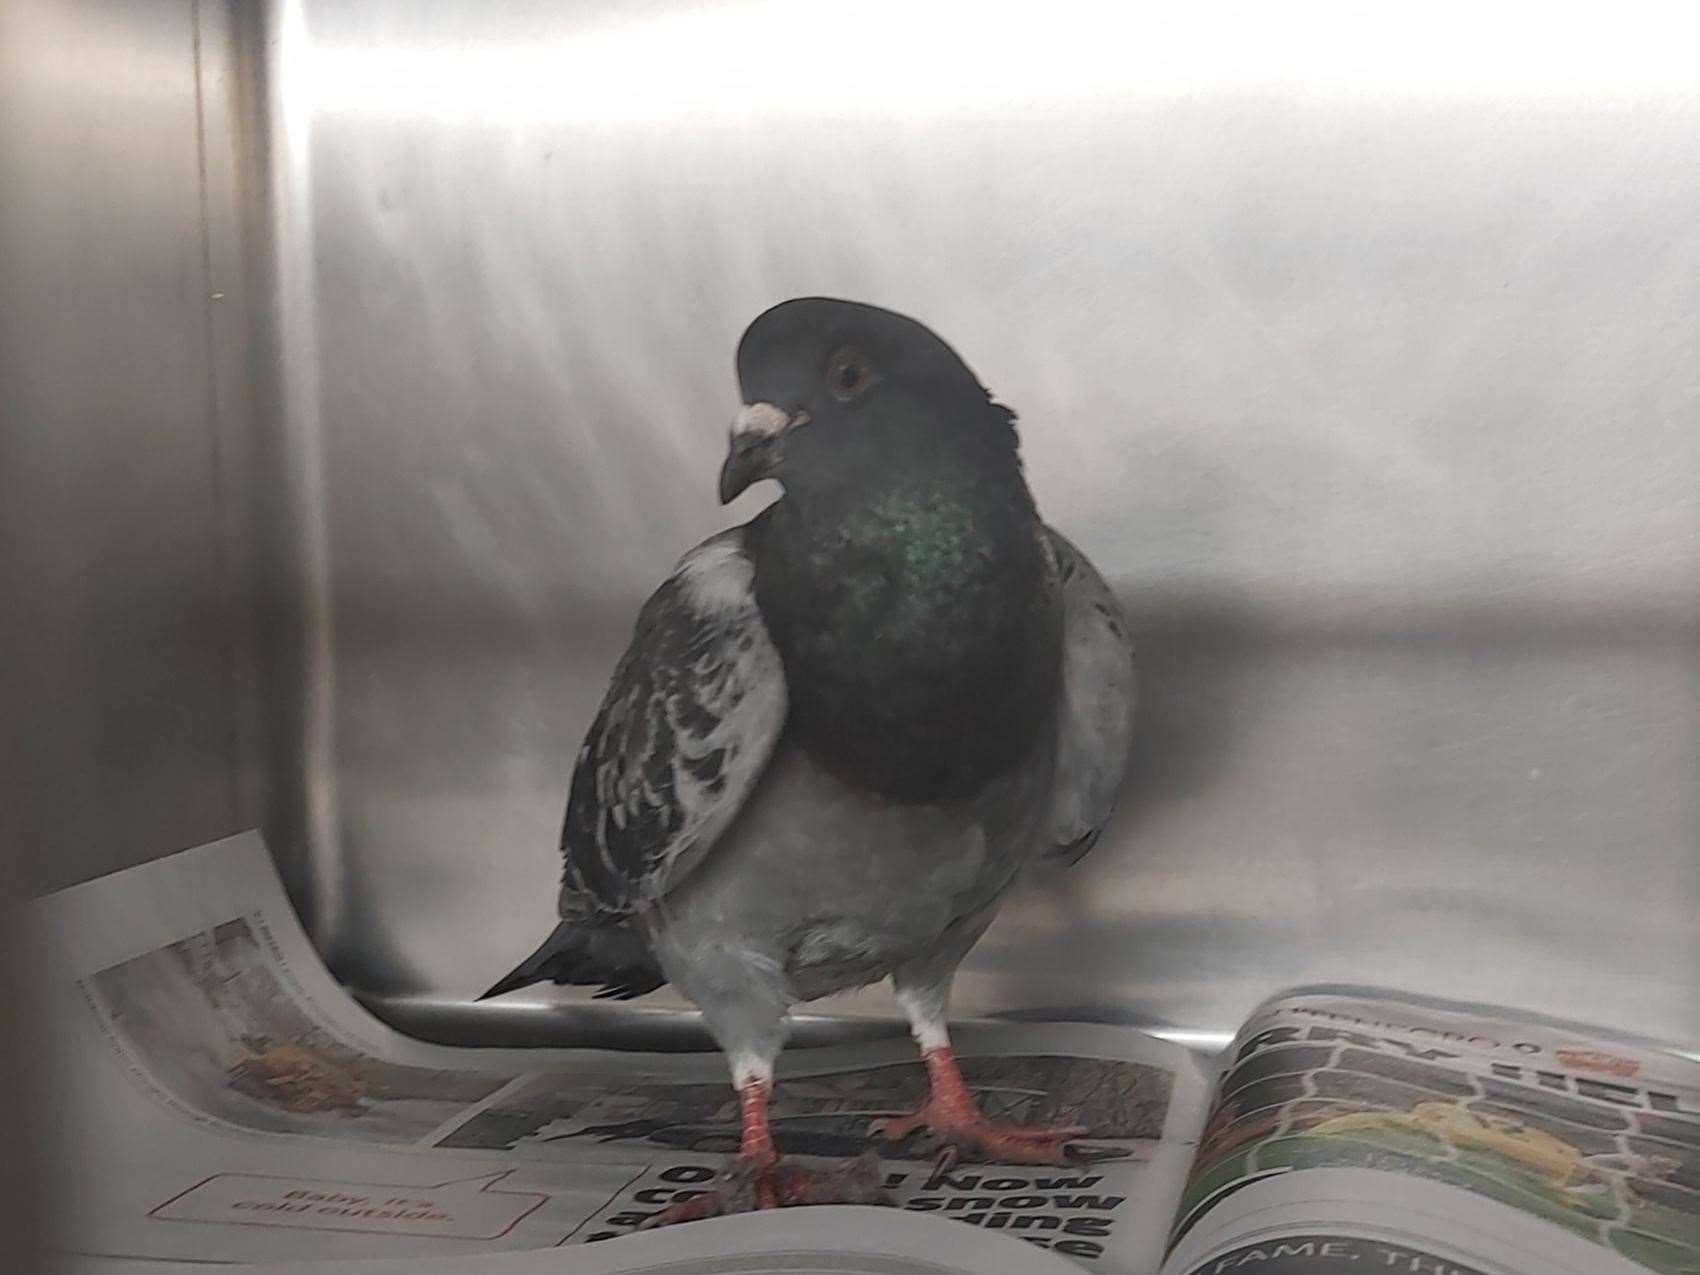 Paddy the pigeon was rescued after getting trapped in empty Debenhams